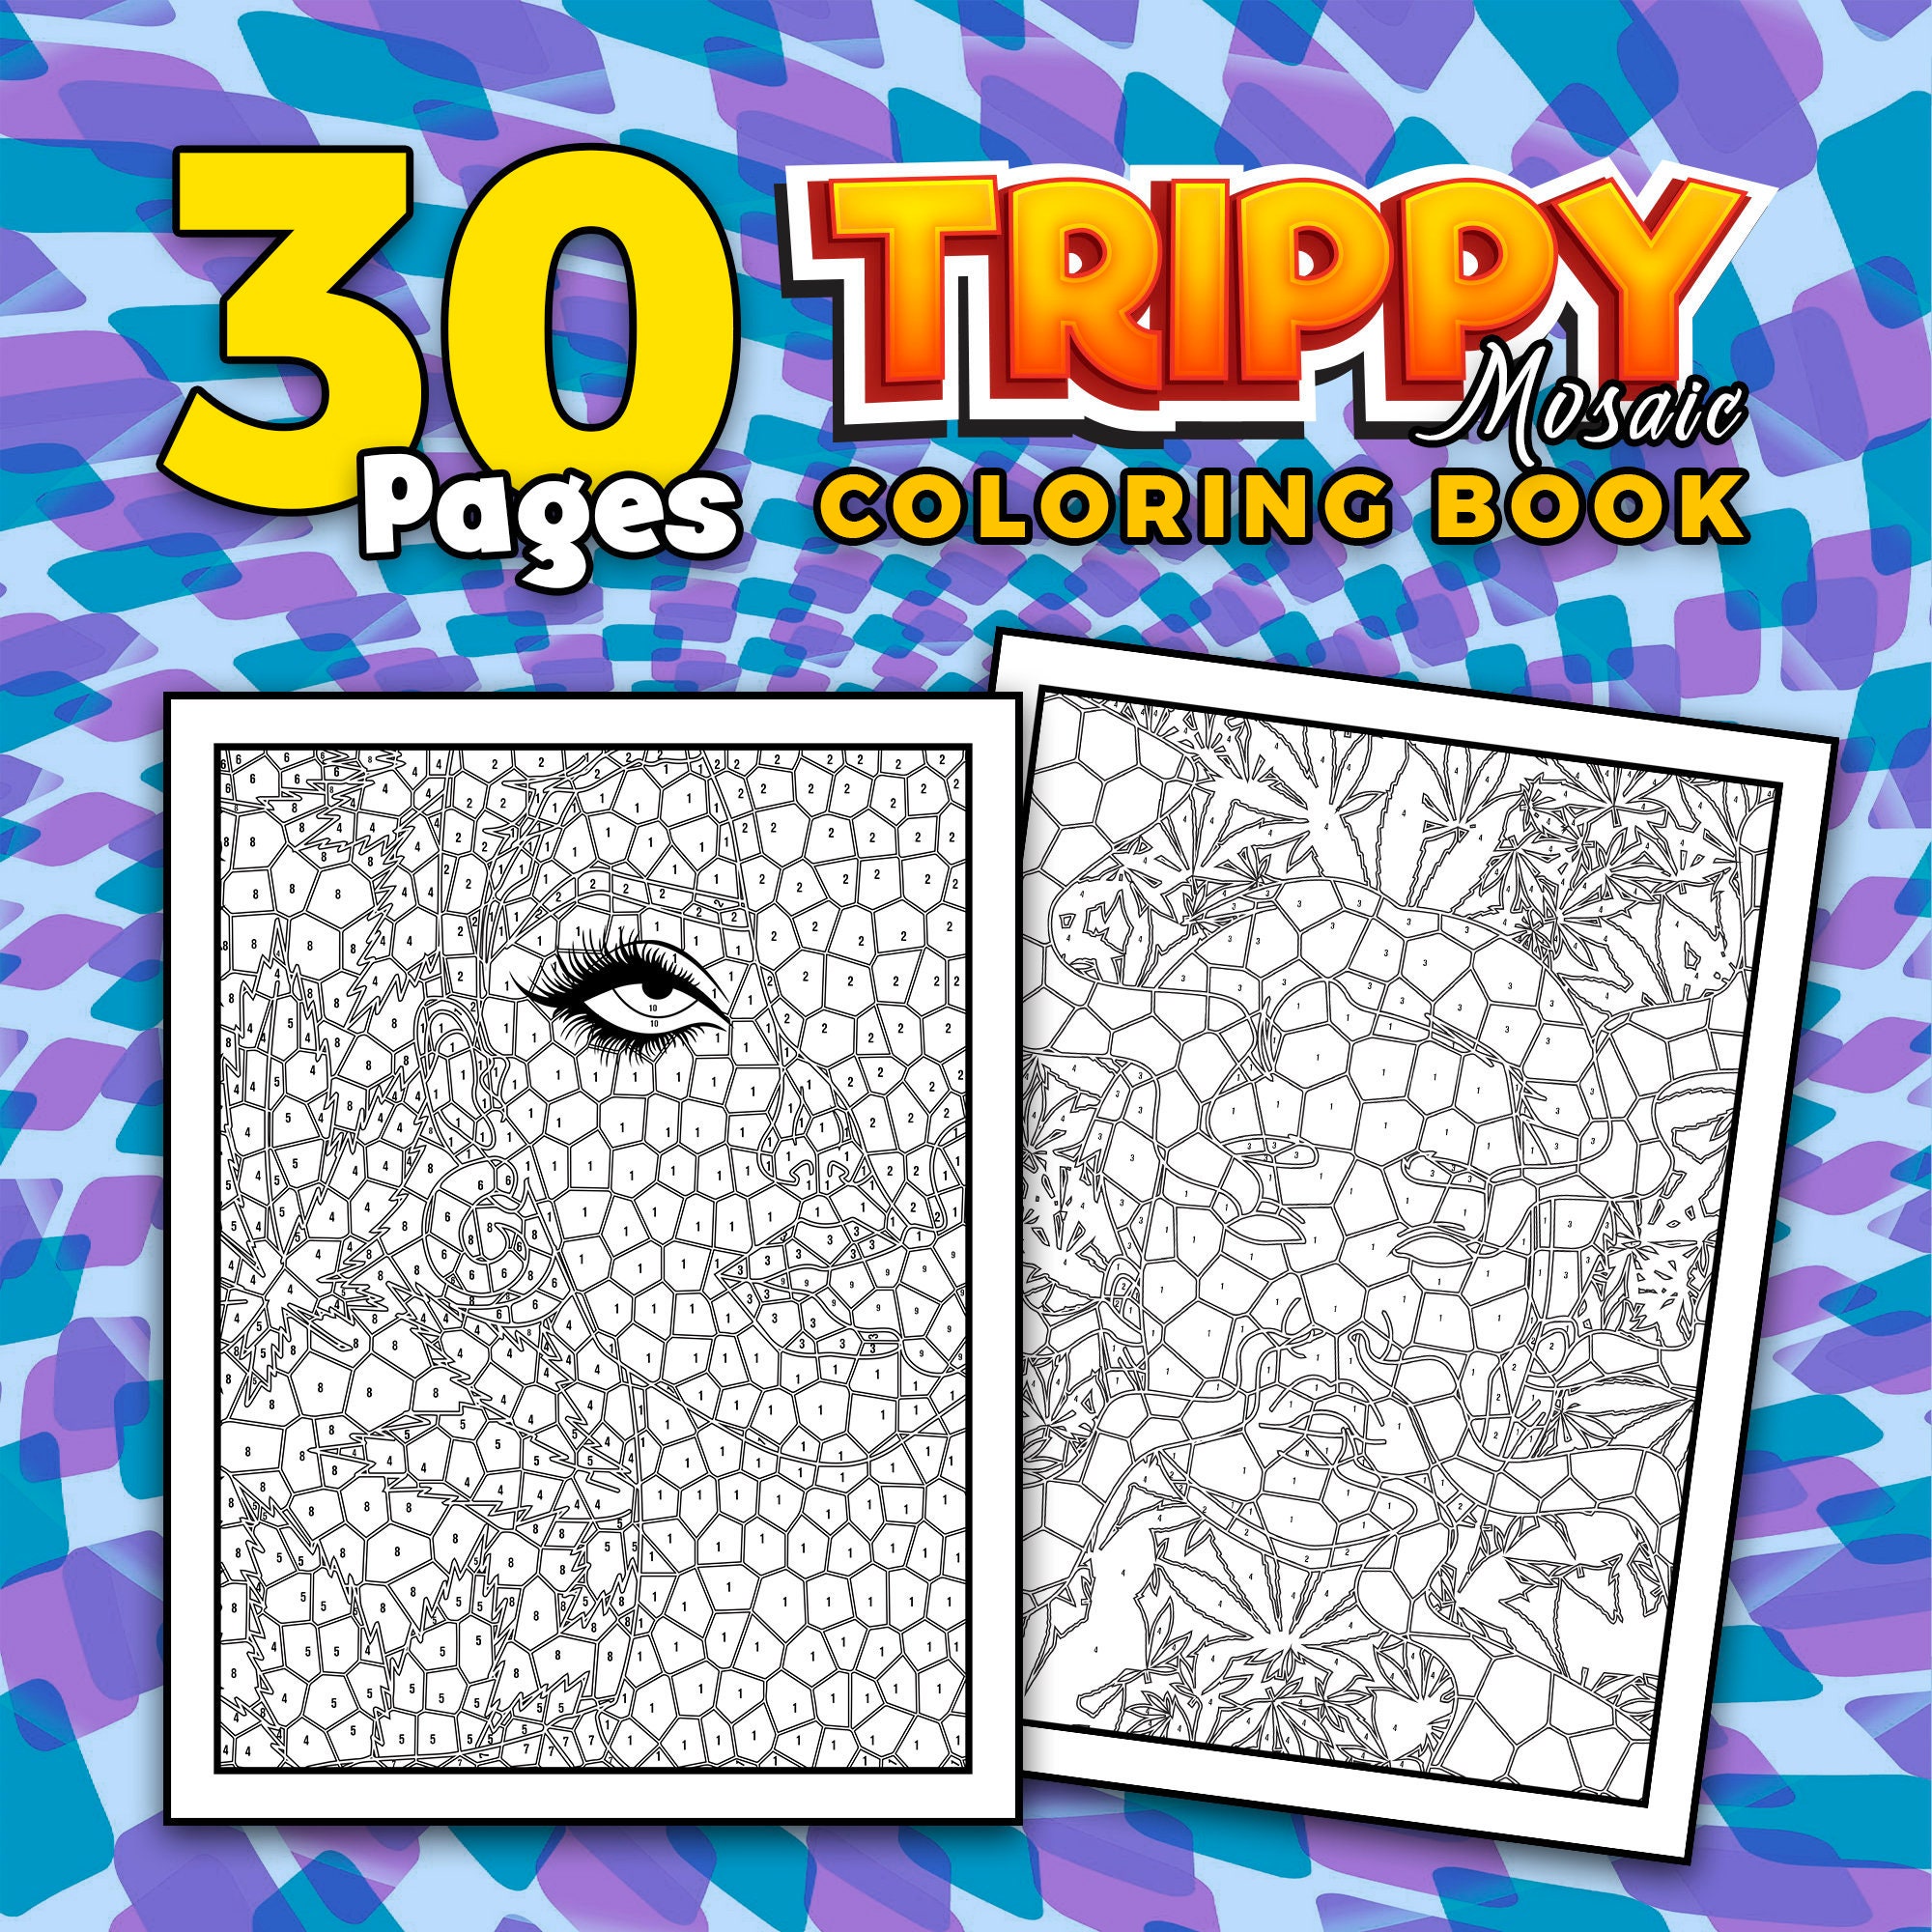 The Ultimate Trippy Coloring Book for Adults: Coloring Pages, Word